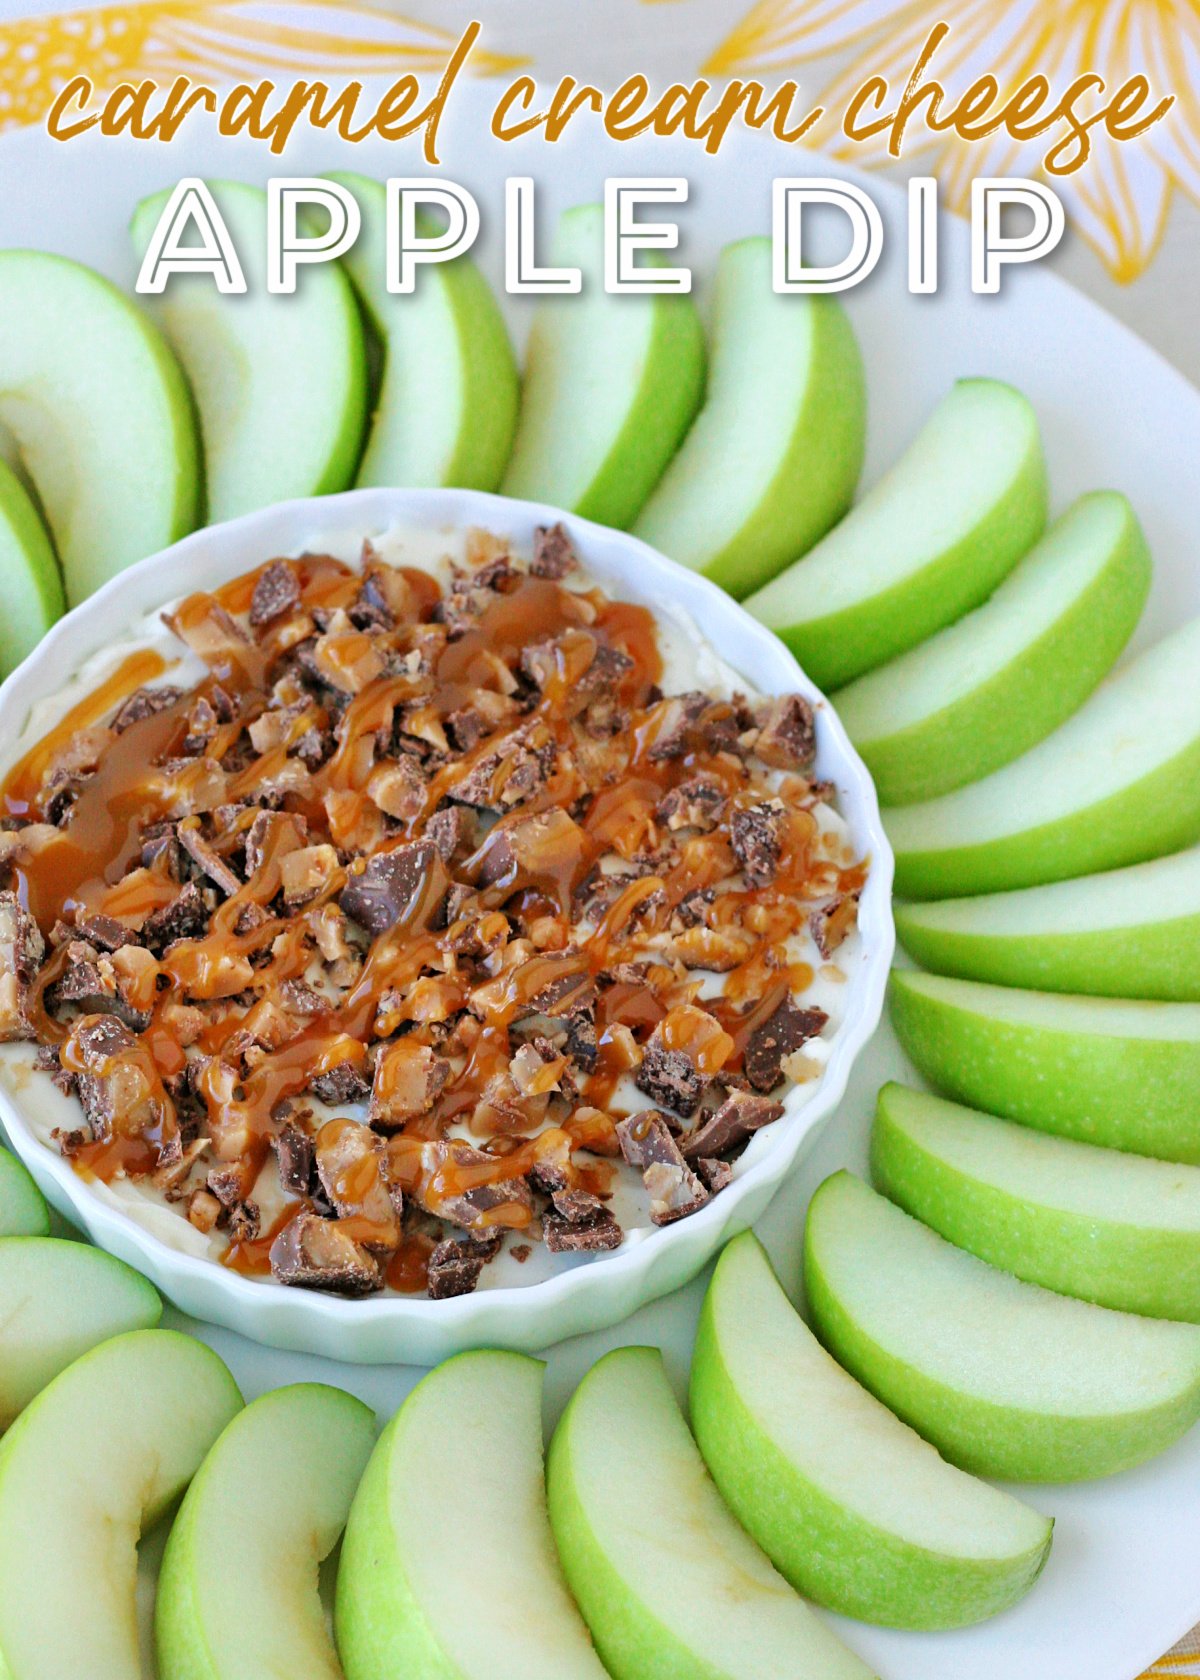 caramel apple dip in white bowl with green apple slices surrounding the bowl with title overlay at top of image.